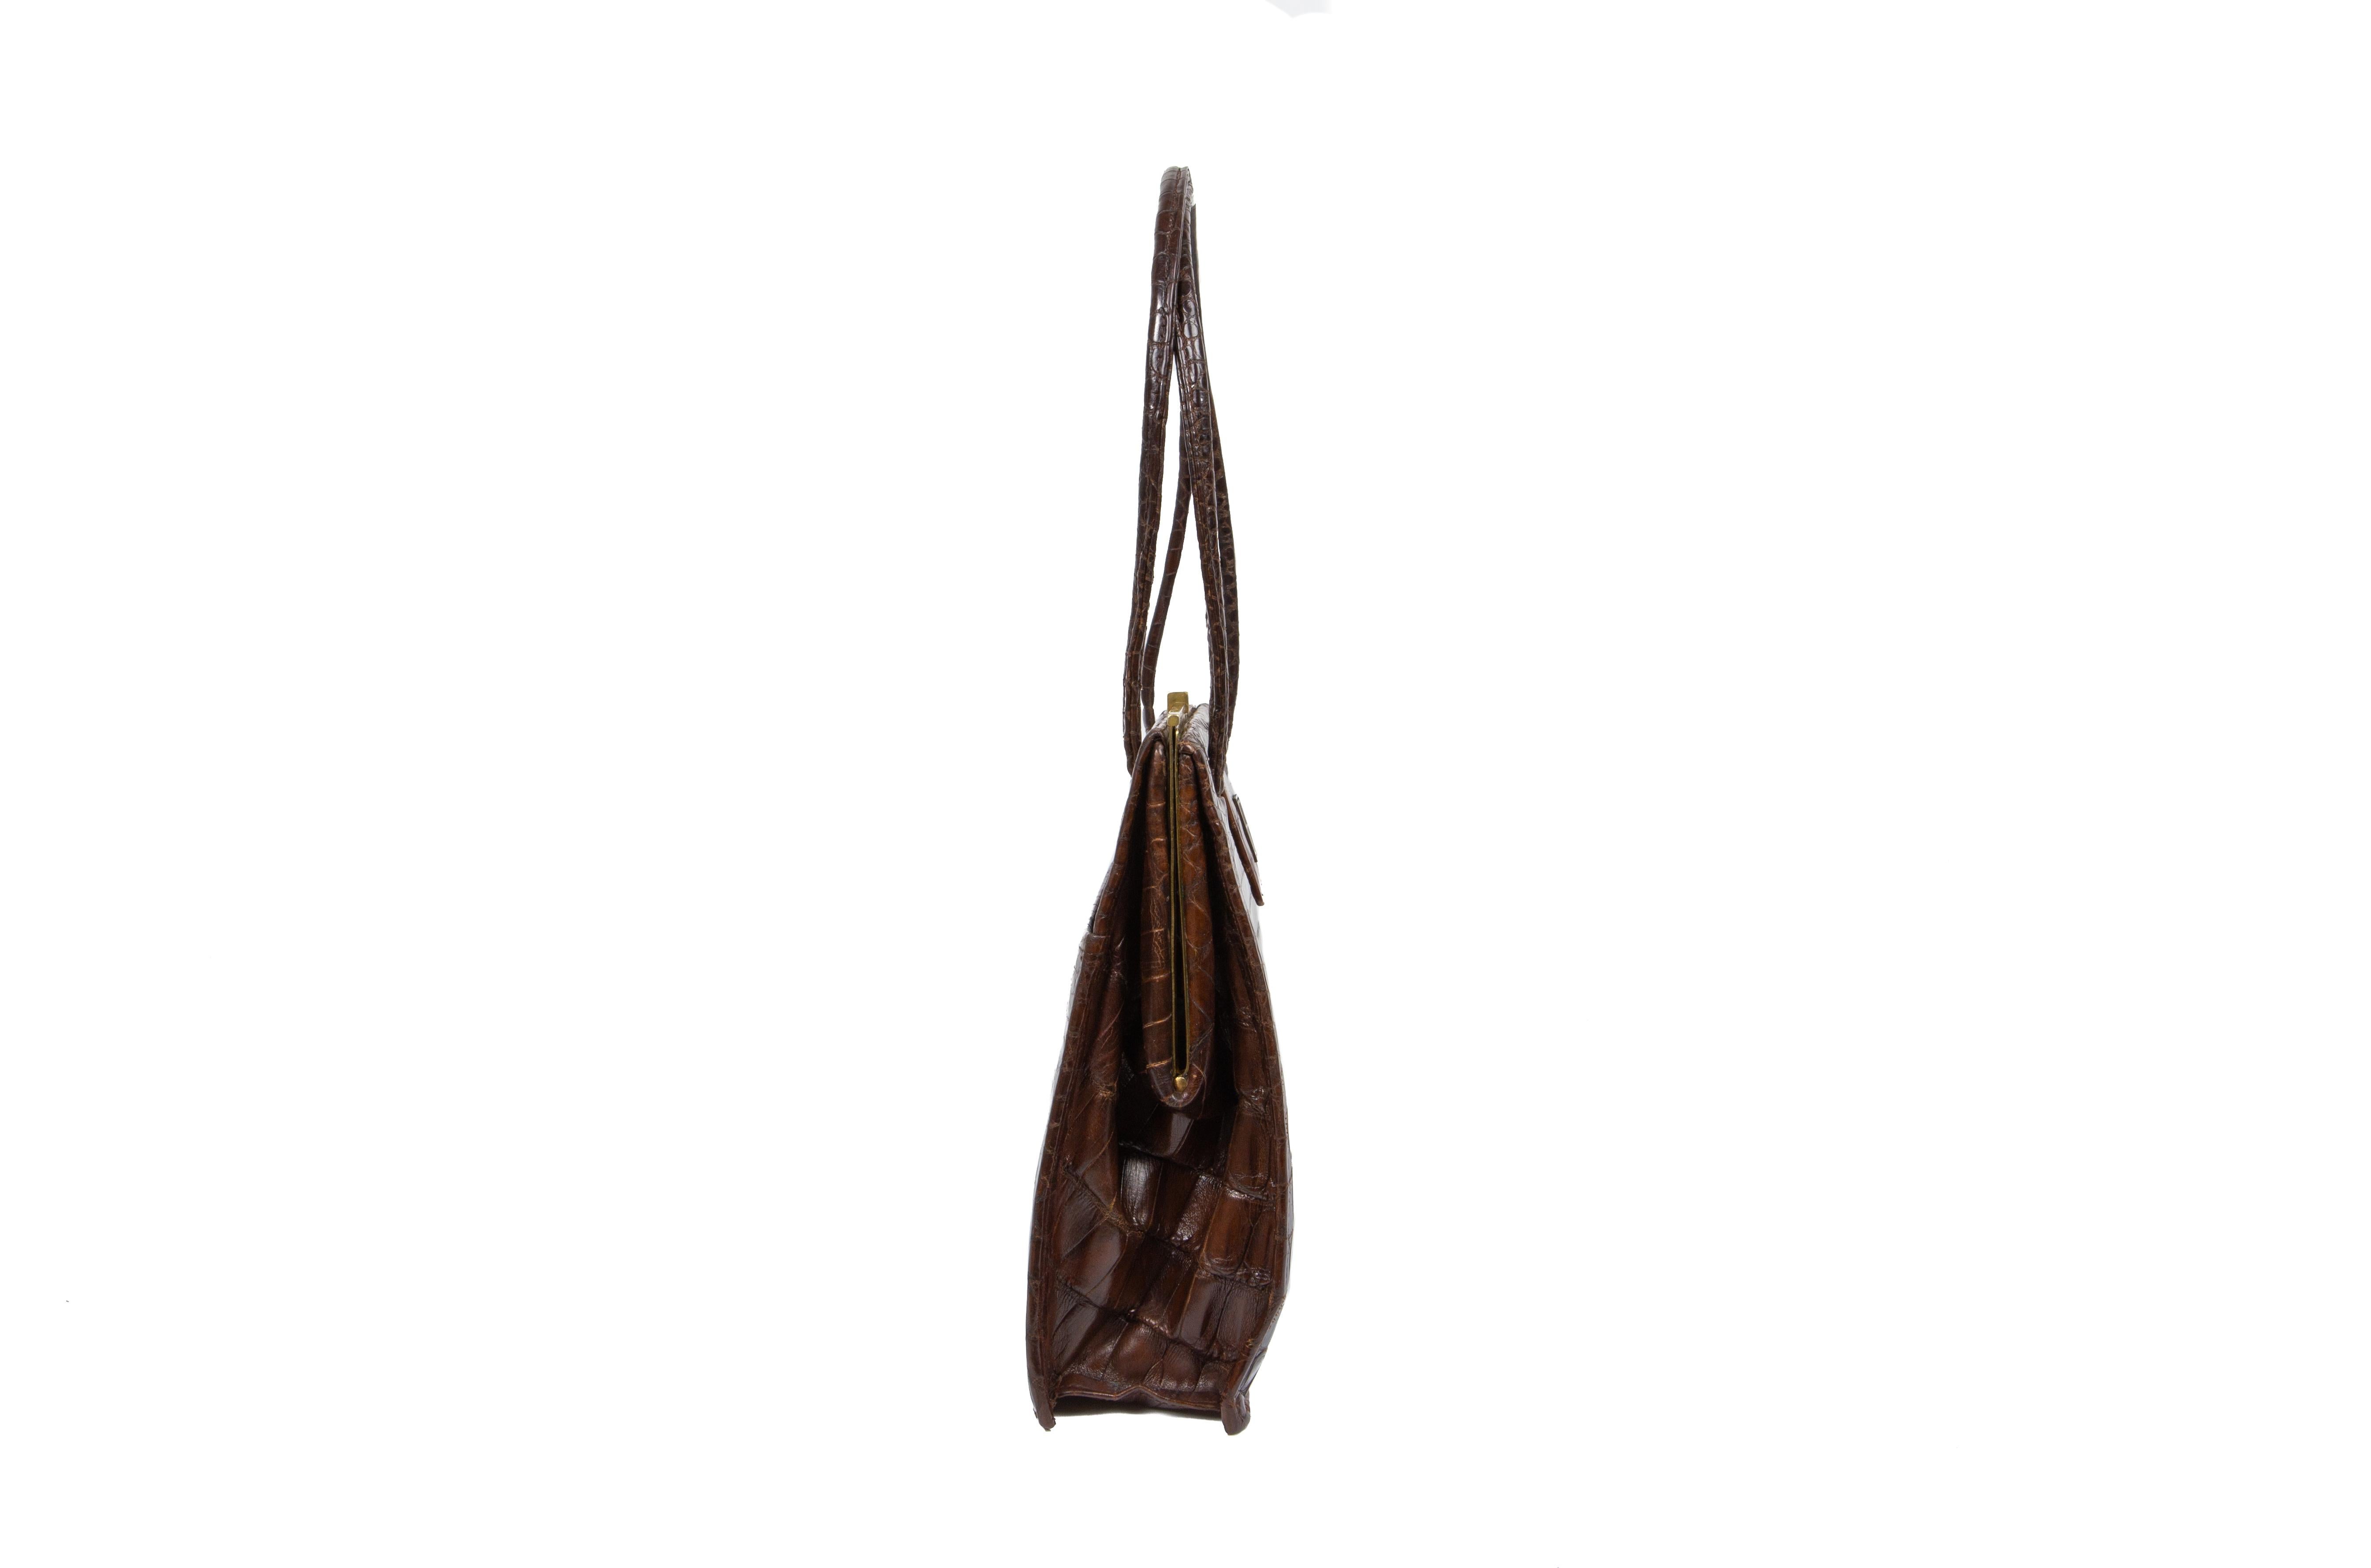 A typical late 1930s Asprey sienna-brown crocodile handbag, comprising of one compartment with one gusseted zipper pocket, two patch pockets piped with chamois-brown leather, one lipstick holder and one outer back pocket, fully lined in an